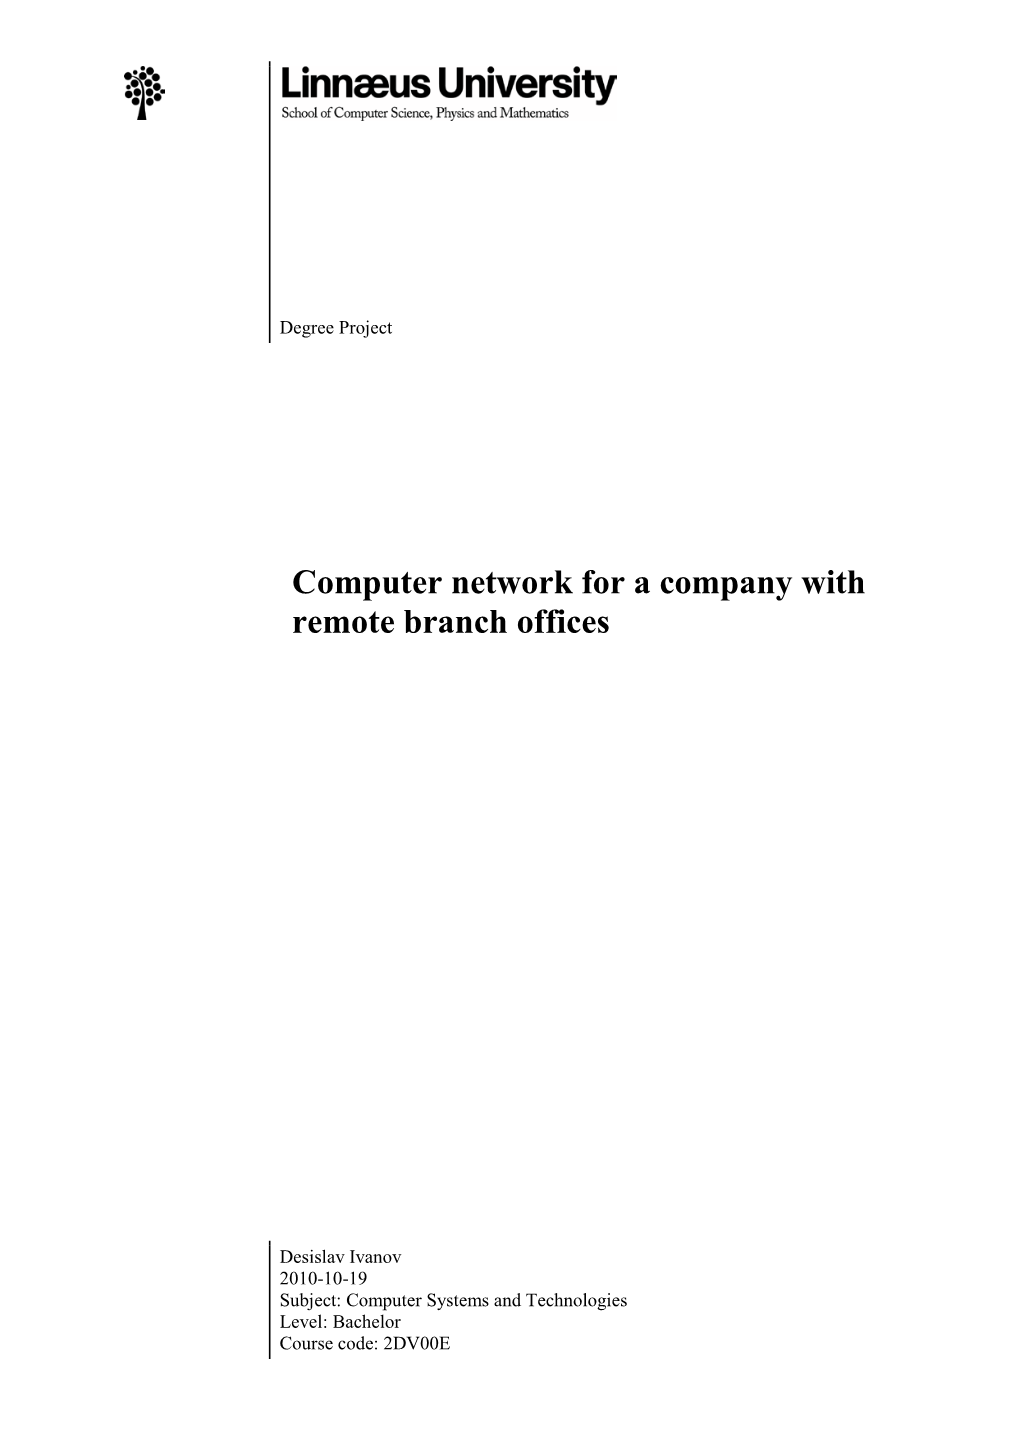 Computer Network for a Company with Remote Branch Offices